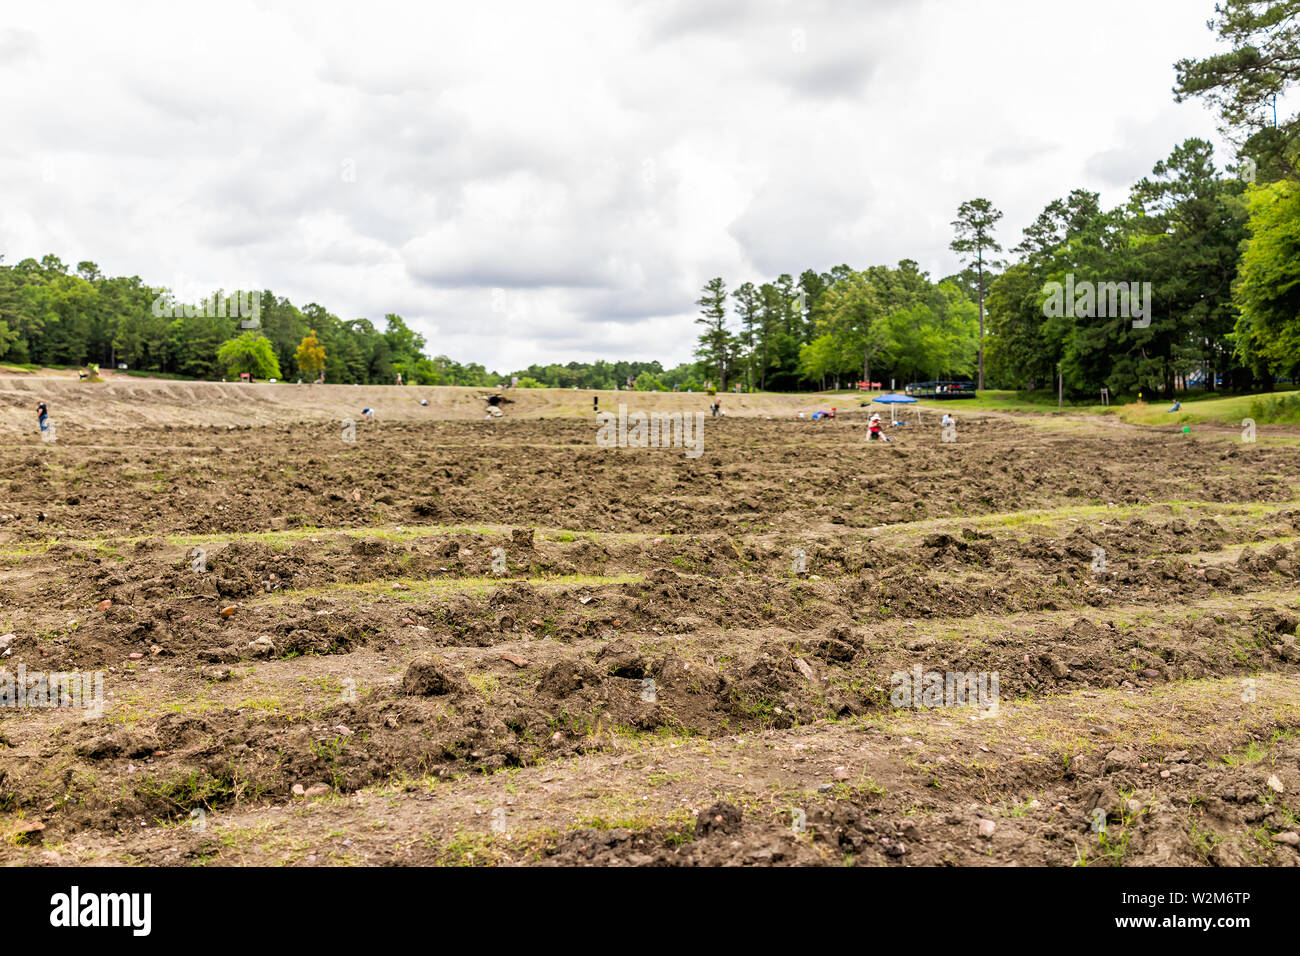 Crater of Diamonds Park with brown soil in Arkansas dirt landscape meadow field and people digging searching for minerals Stock Photo